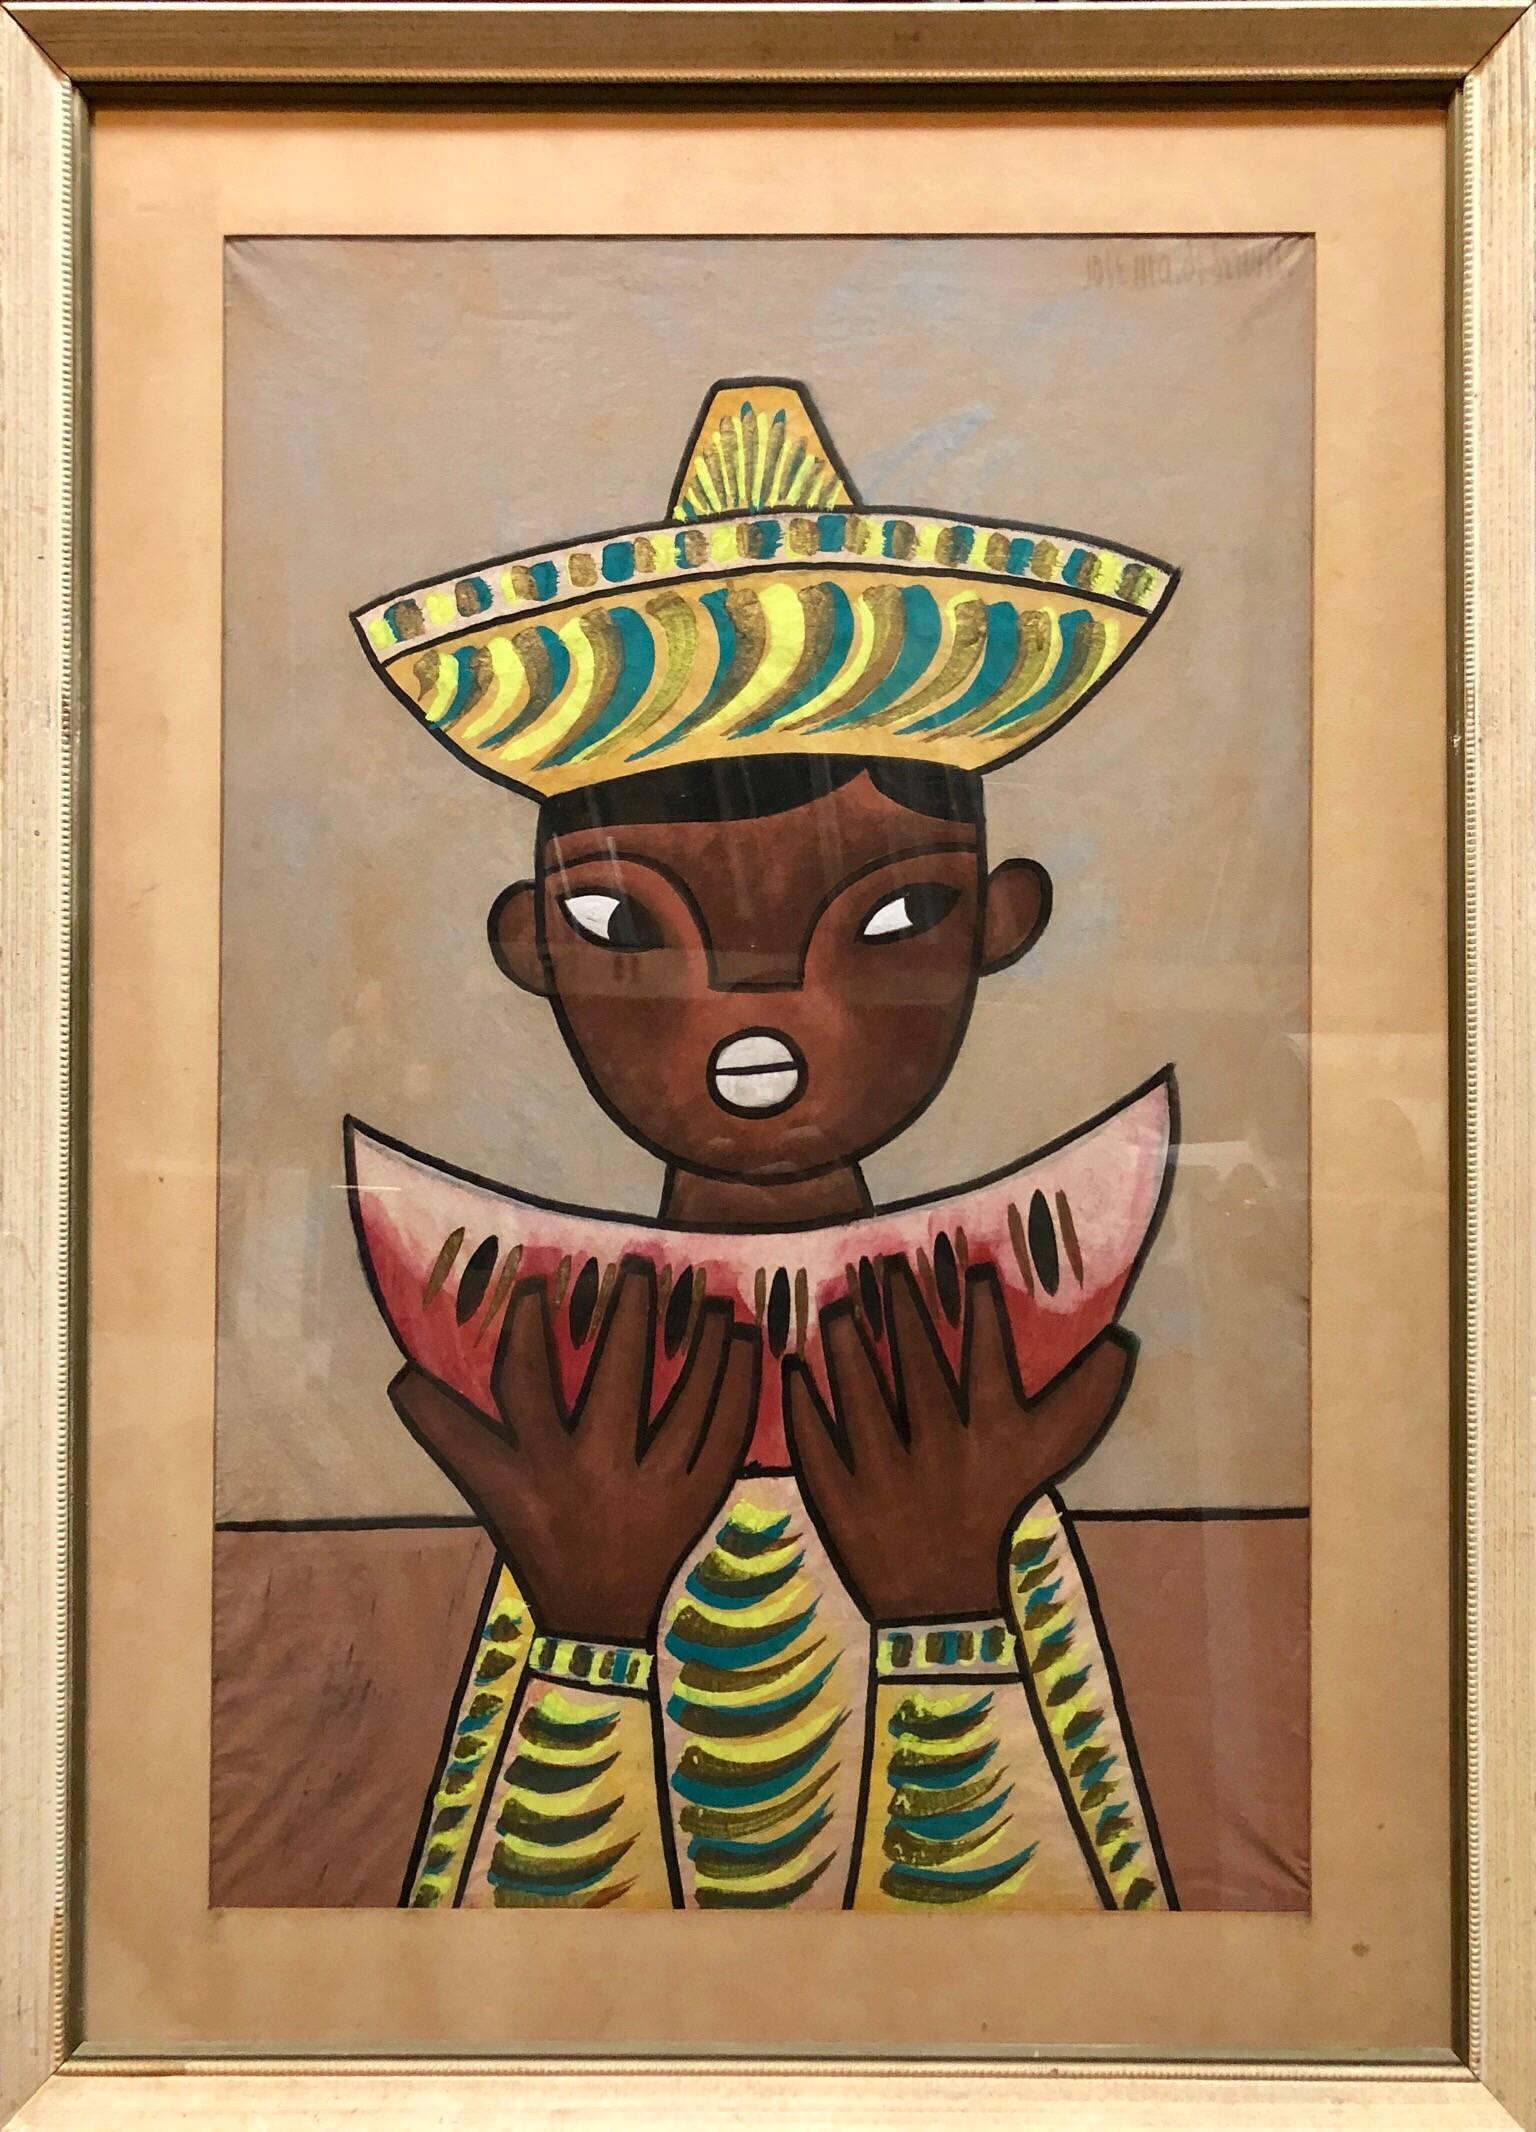 

Genre: Latin American
Subject: Children
Medium: Mixed Media
Surface: Paper
Country: Mexico
Dimensions include Frame: 36X26

The sweetness that characterizes the work of Mexican painter Jose Maria de Servin (1917-83) is a melancholy and placid one.